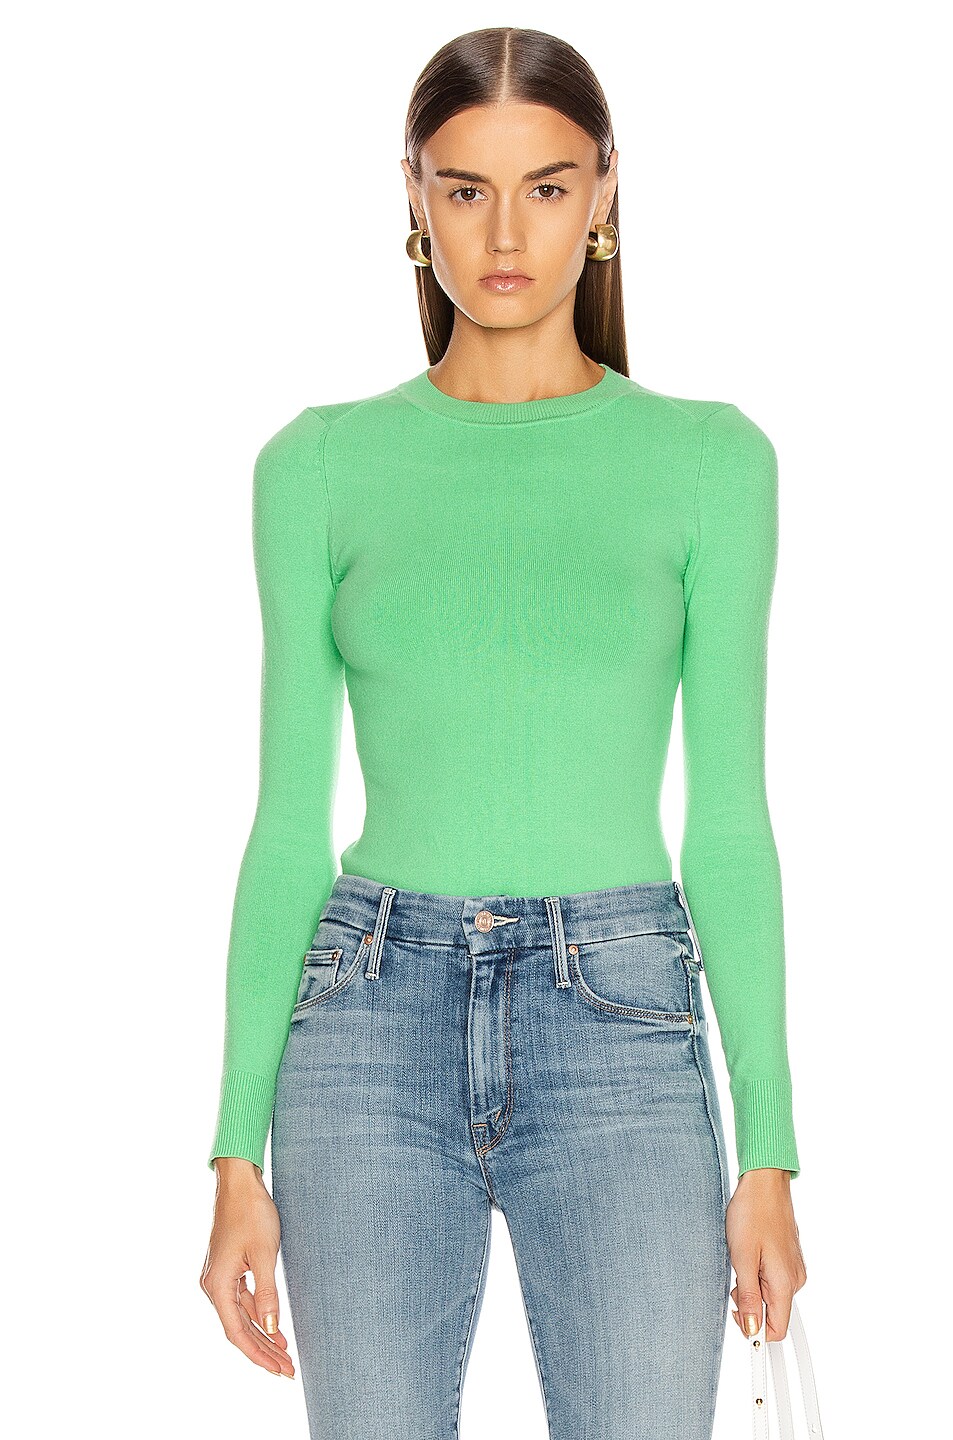 Image 1 of JoosTricot Long Sleeve Crew Neck Sweater in Tree Frog